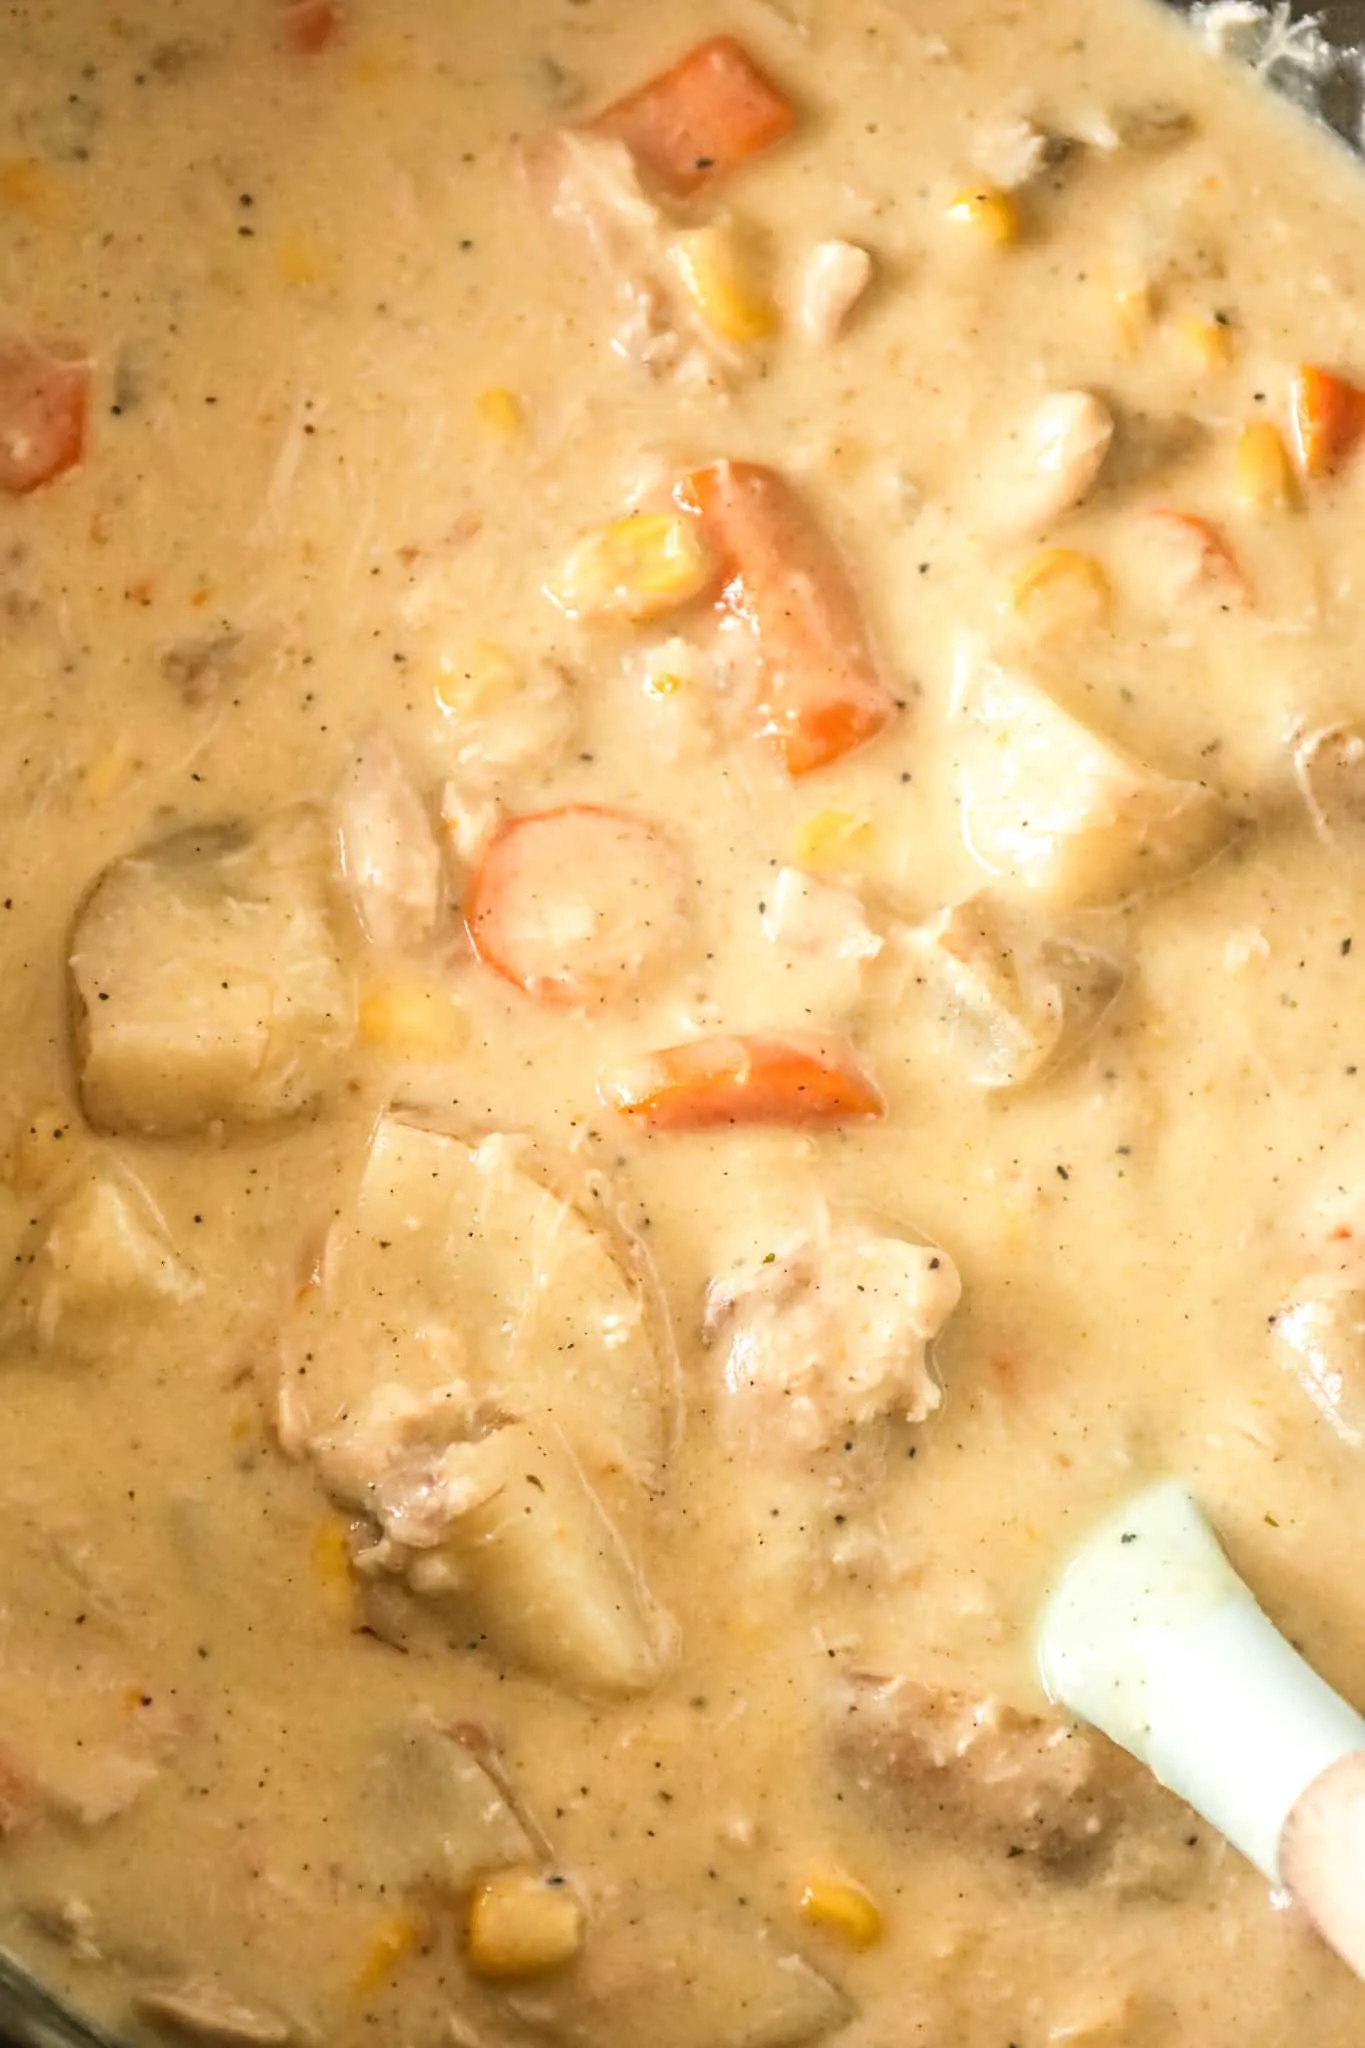 Crock Pot Chicken Stew is a hearty slow cooker dinner recipe loaded with chicken thigh chunks, russet potatoes, carrots, onions and corn all cooked in a creamy chicken soup mixture.